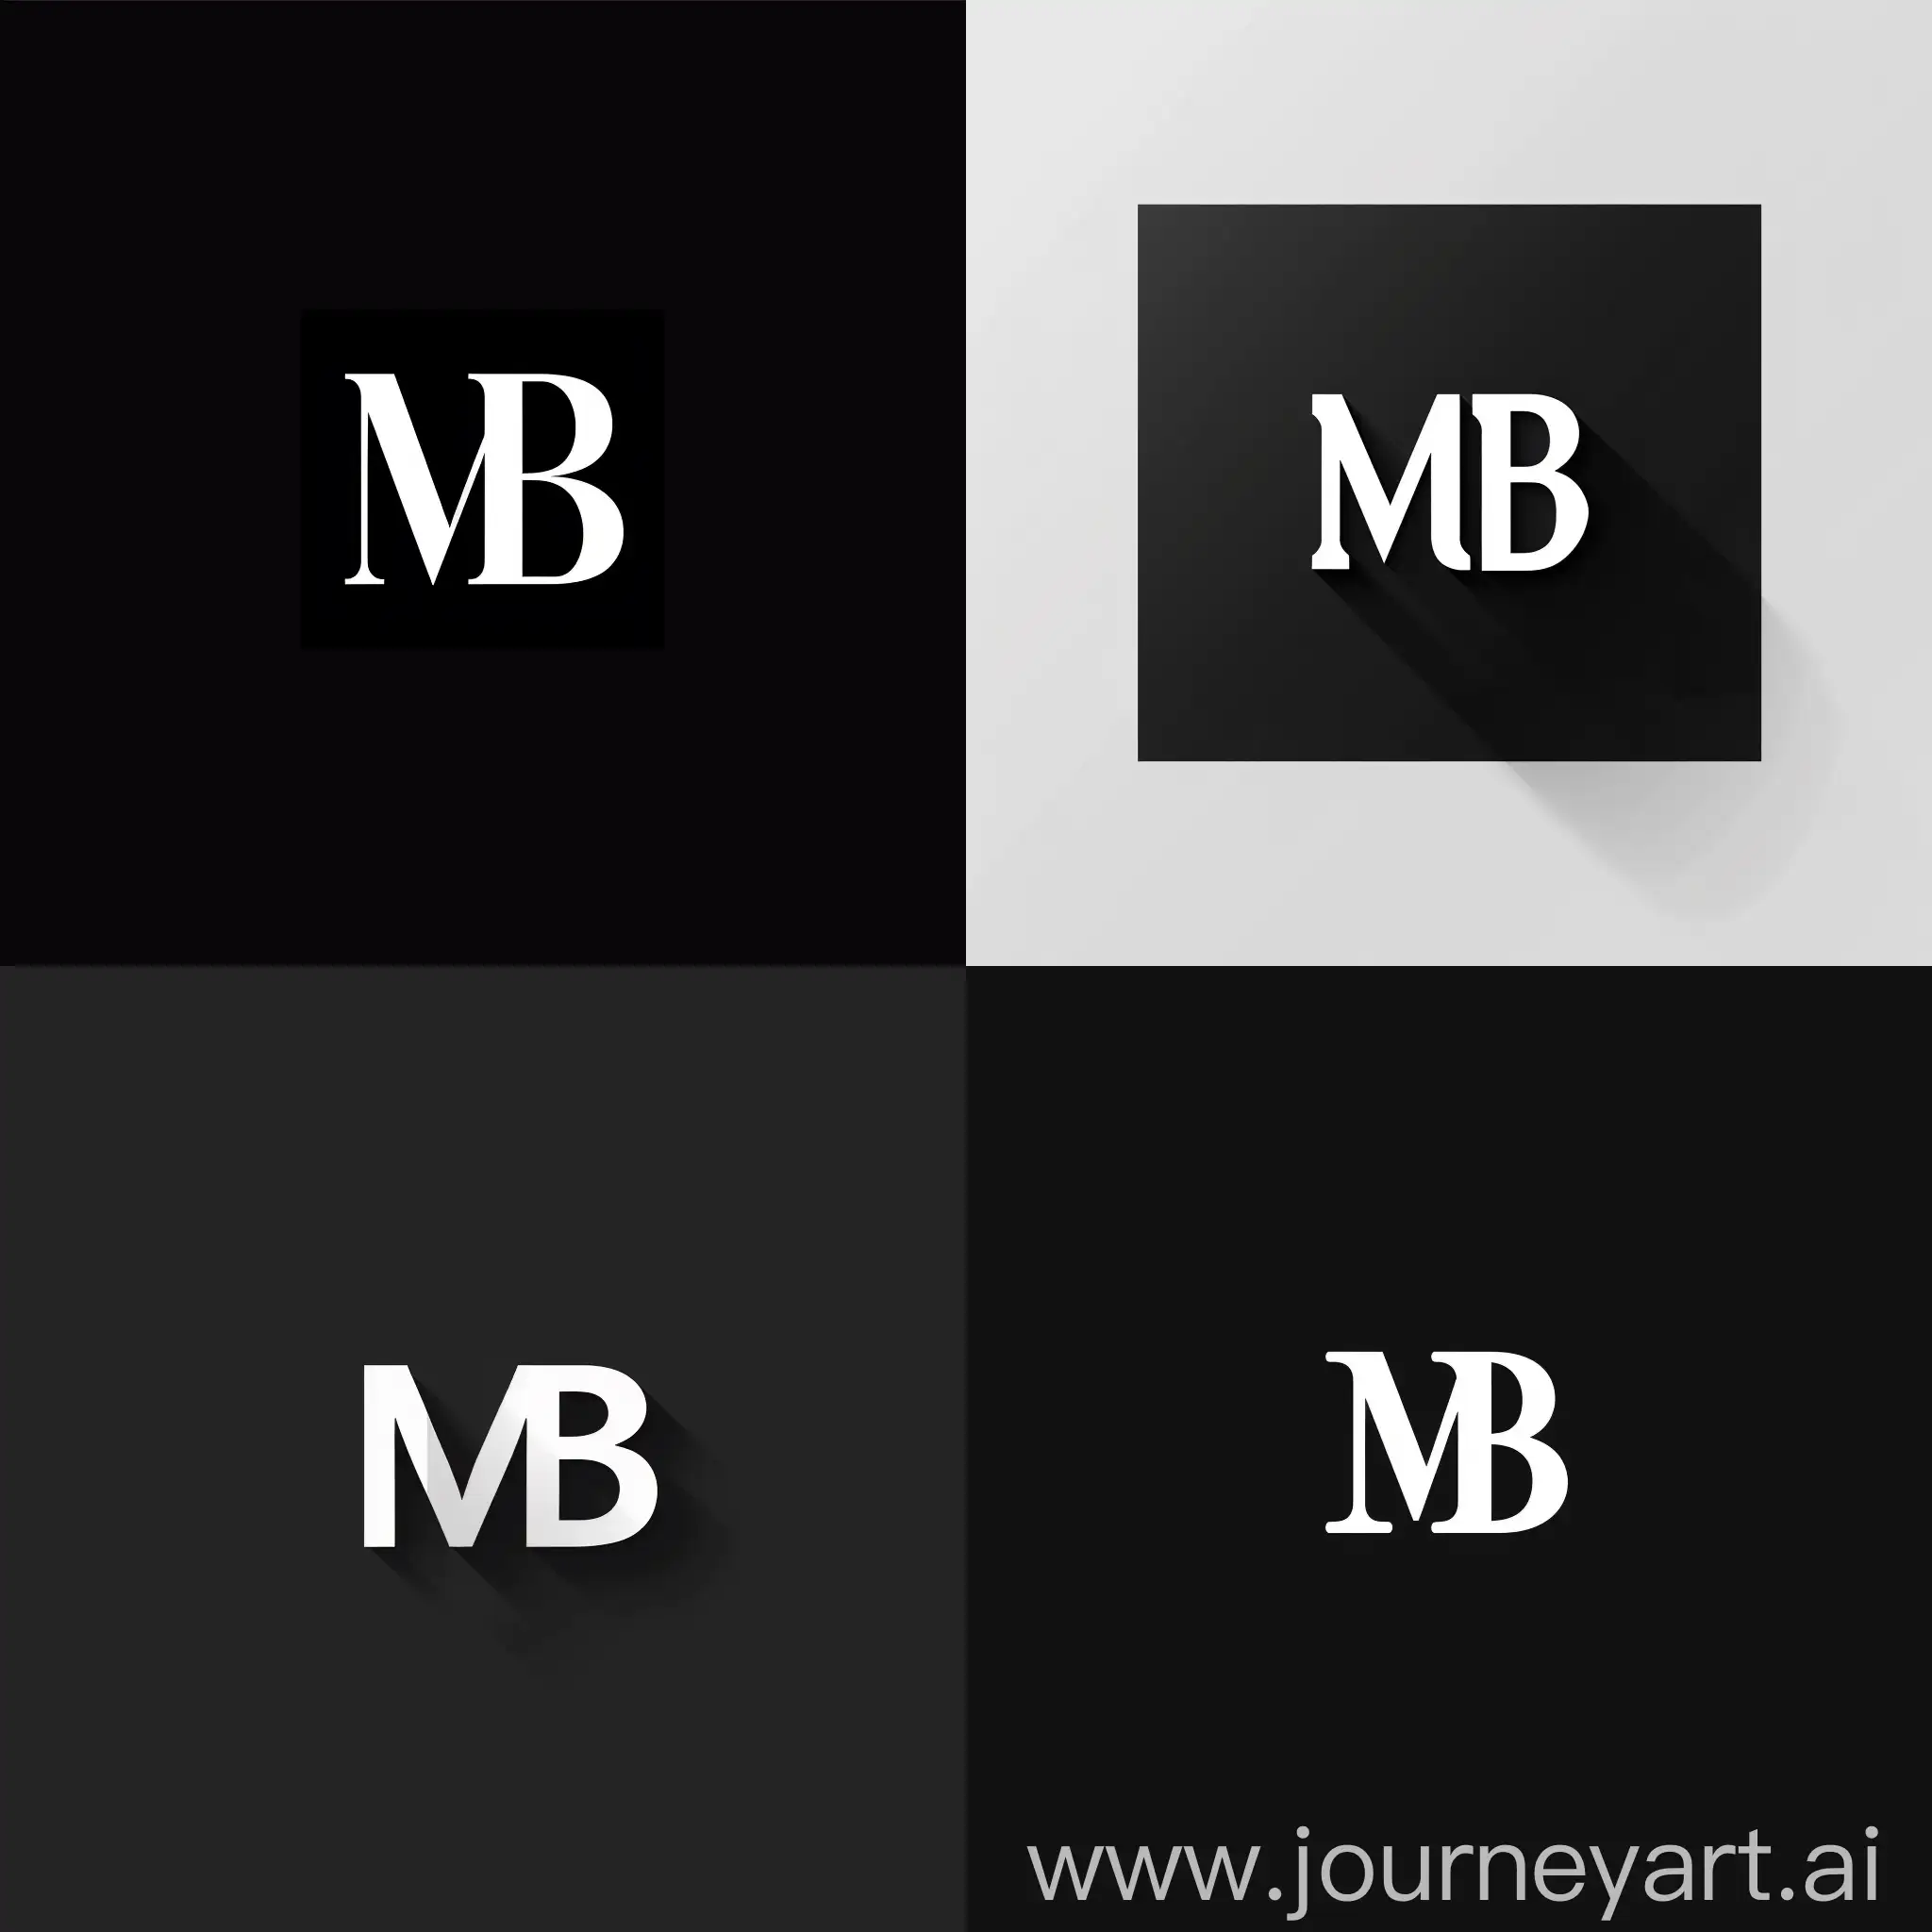 minimalist logo with name  "MB" , Stylish logo with stylish fonts, interaction with the letters mb, no colors, black and white, no background color